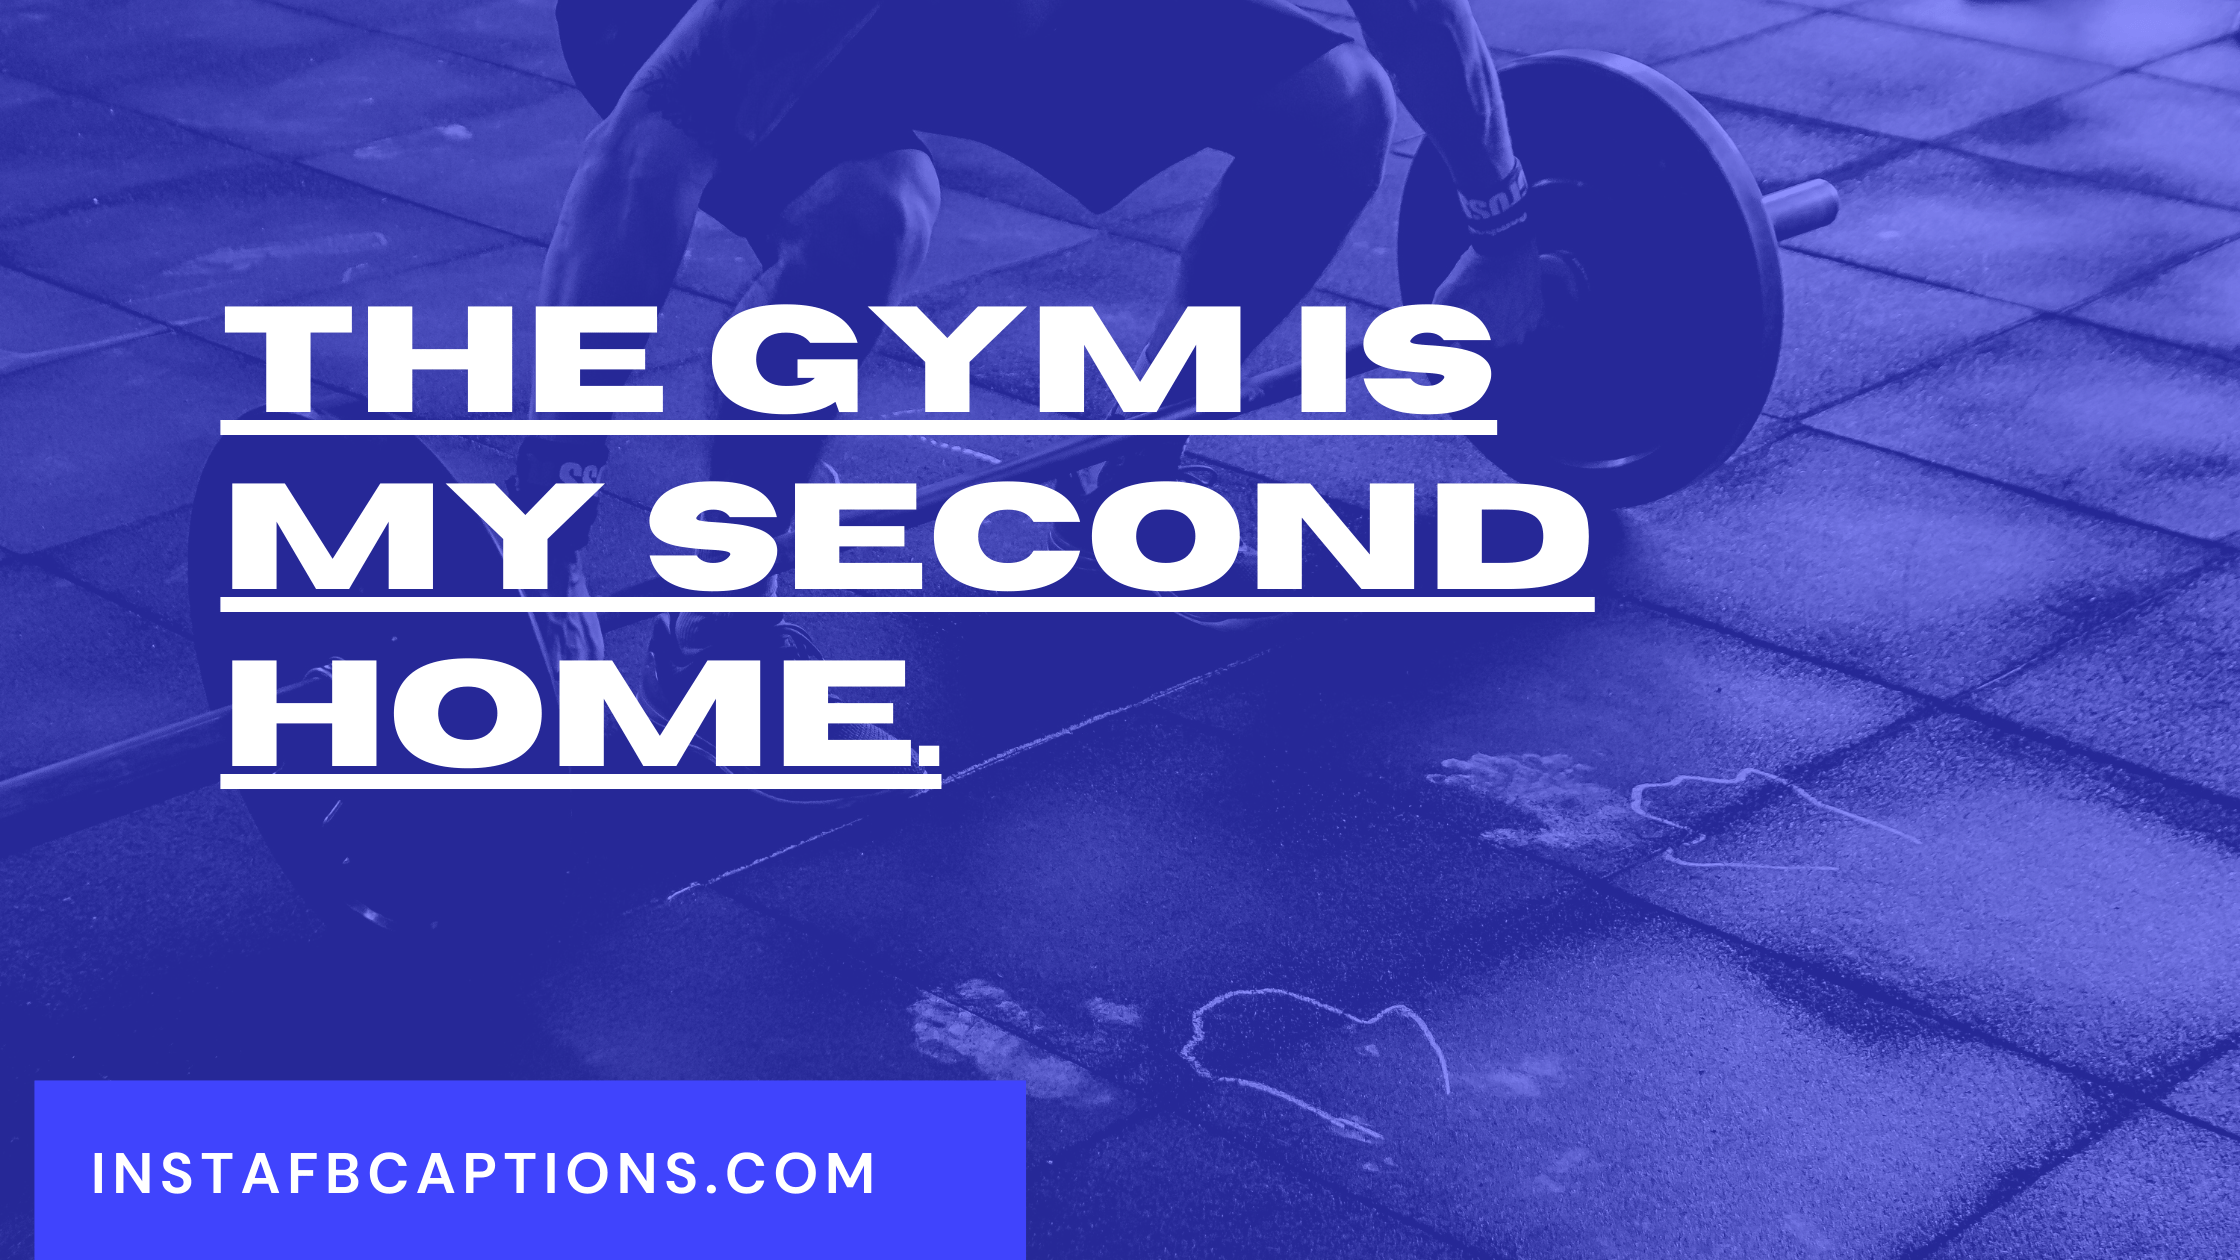 The gym is my second home gym captions - Captions for Exercises in GYM - [NEW] Best Gym/Workout Captions for your Instagram Selfies 2023